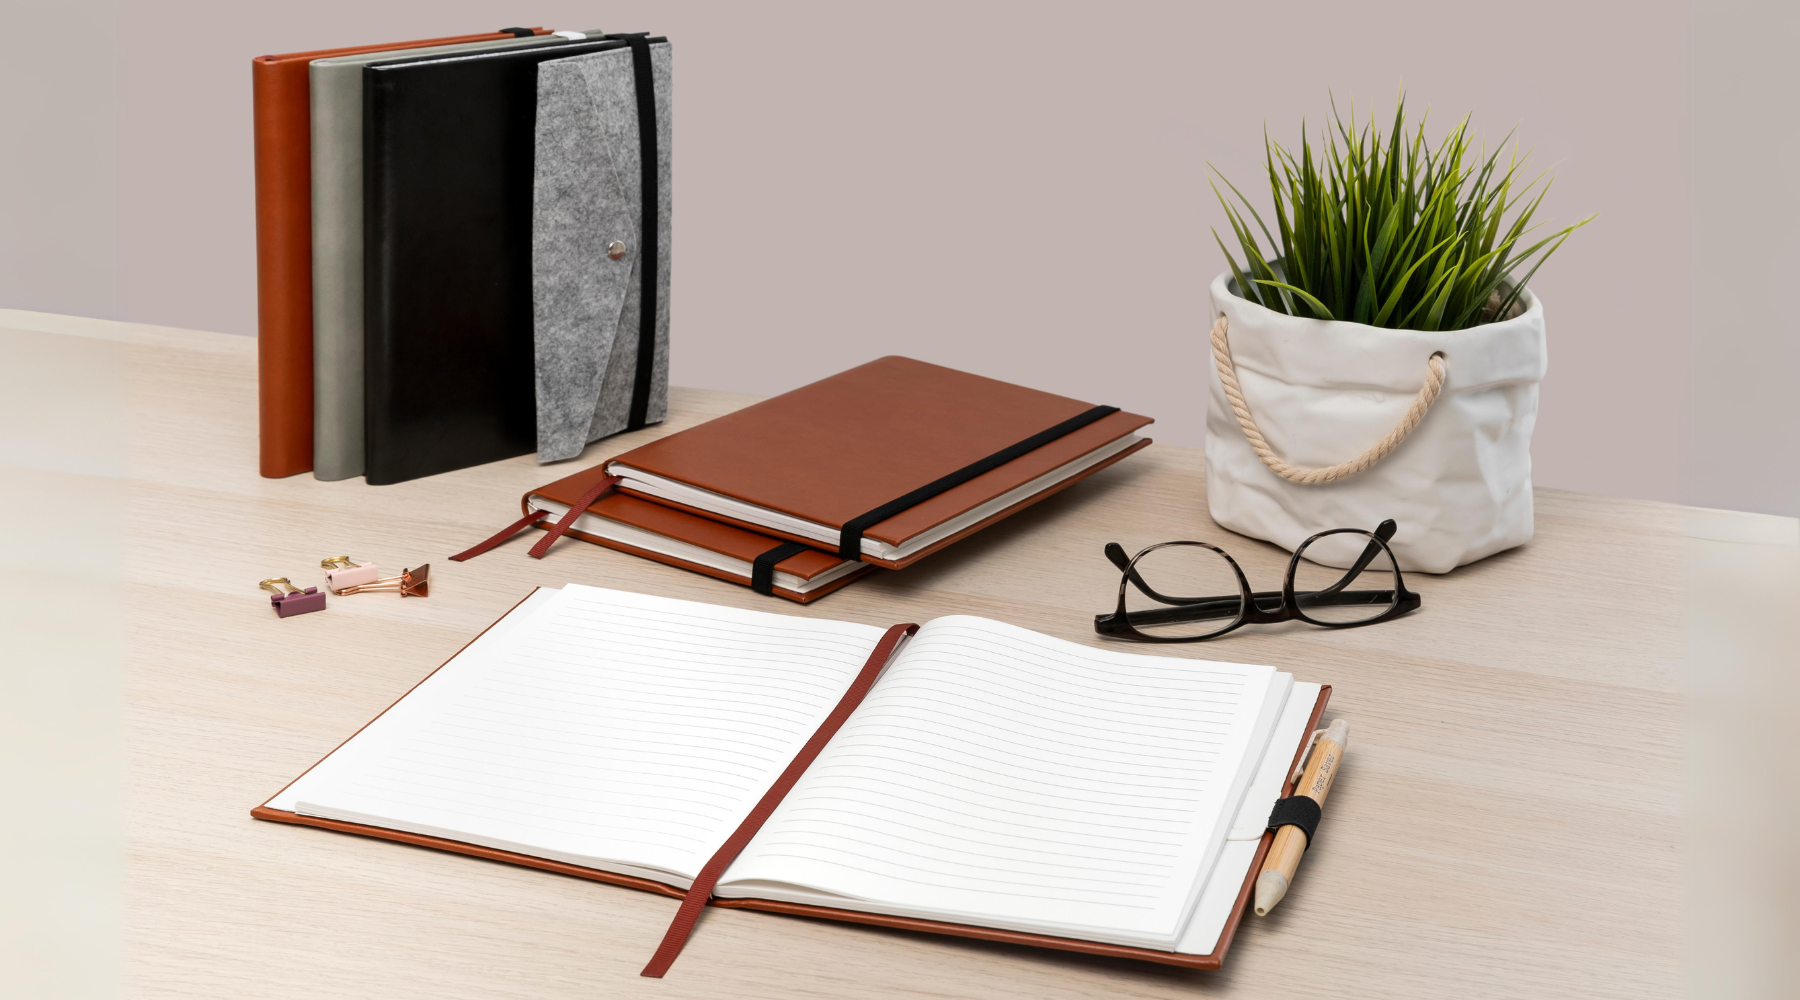 The Paper Saver Refillable Notebooks with Stone Paper Notebook Refills and eco stationery on a desk for sustainable living